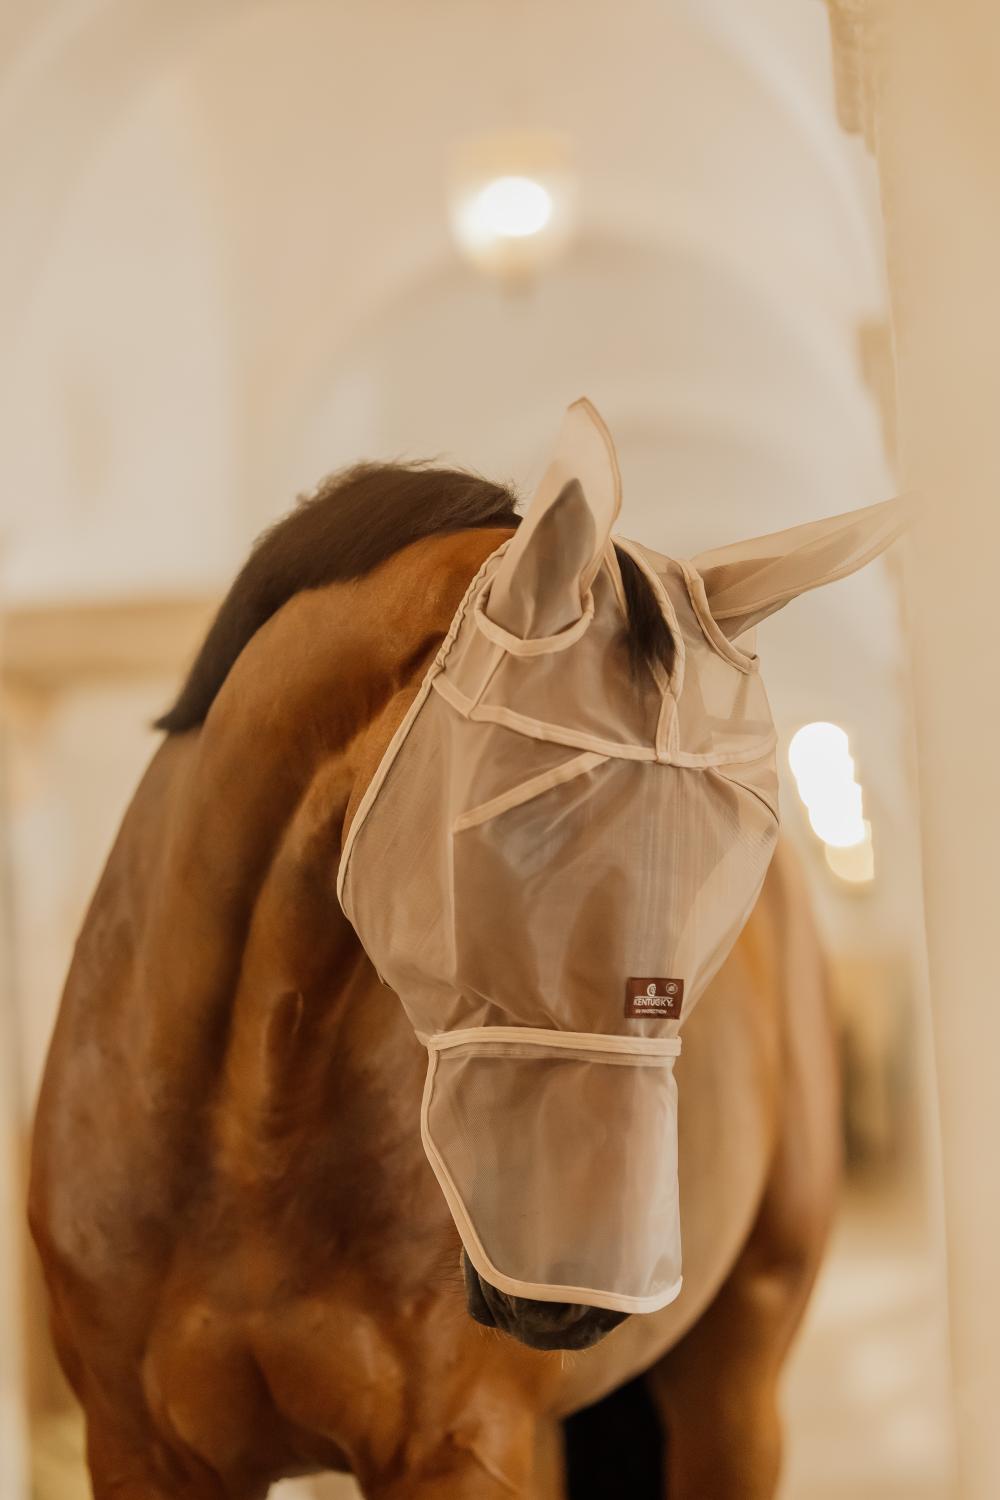 Fly Mask Classic with ears & nose